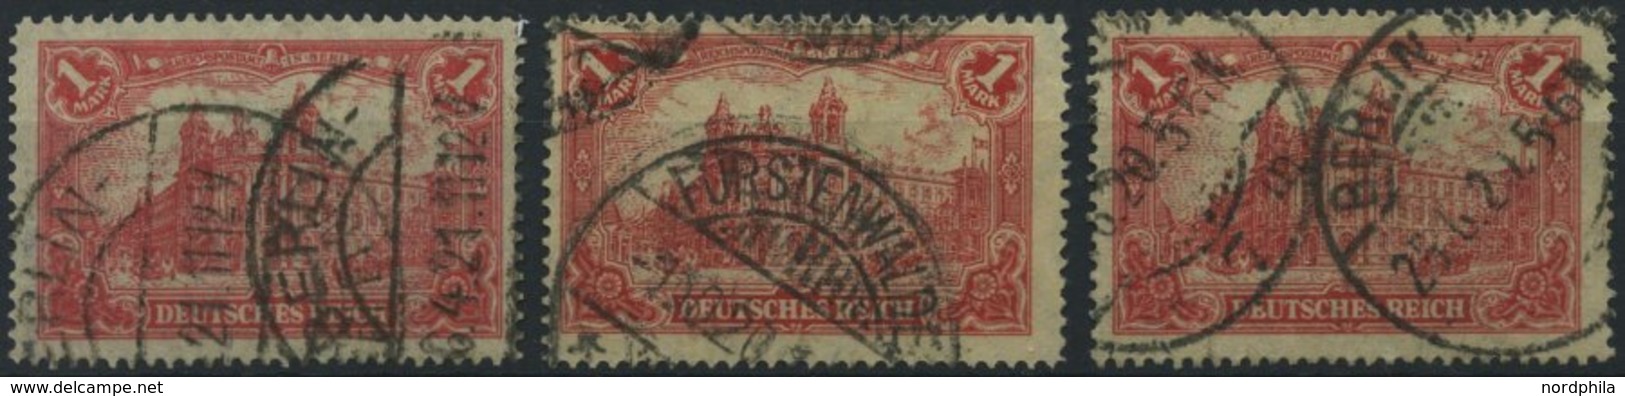 Dt. Reich A 113II,III,IV O, 1920, 1 M. Rot, 3 Plattenfehler, Feinst/Pracht, Gepr. Infla, Mi. 185.- - Used Stamps